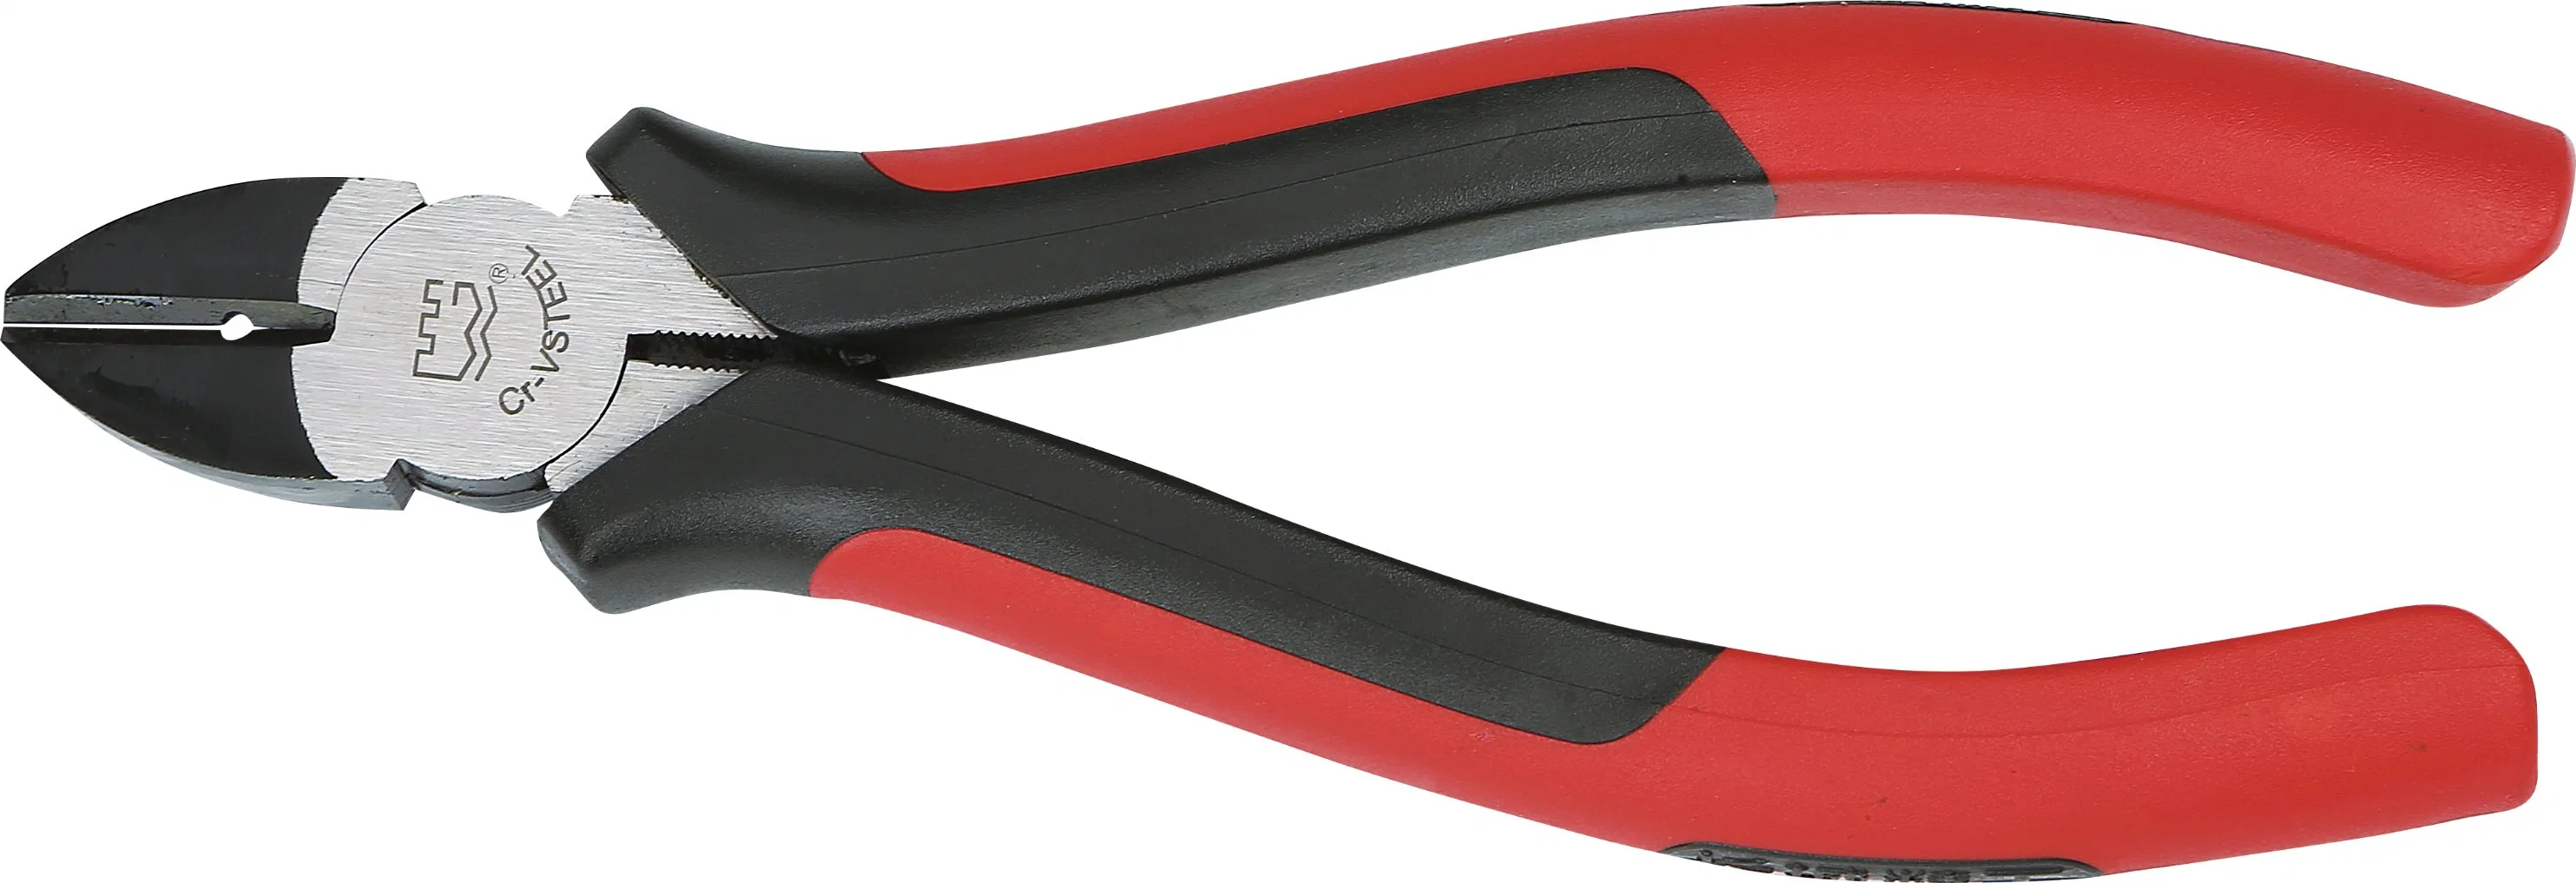 Different Models of Insulated Diagonal Cutting Pliers Industrial Hot Selling Diagonal-Cutting